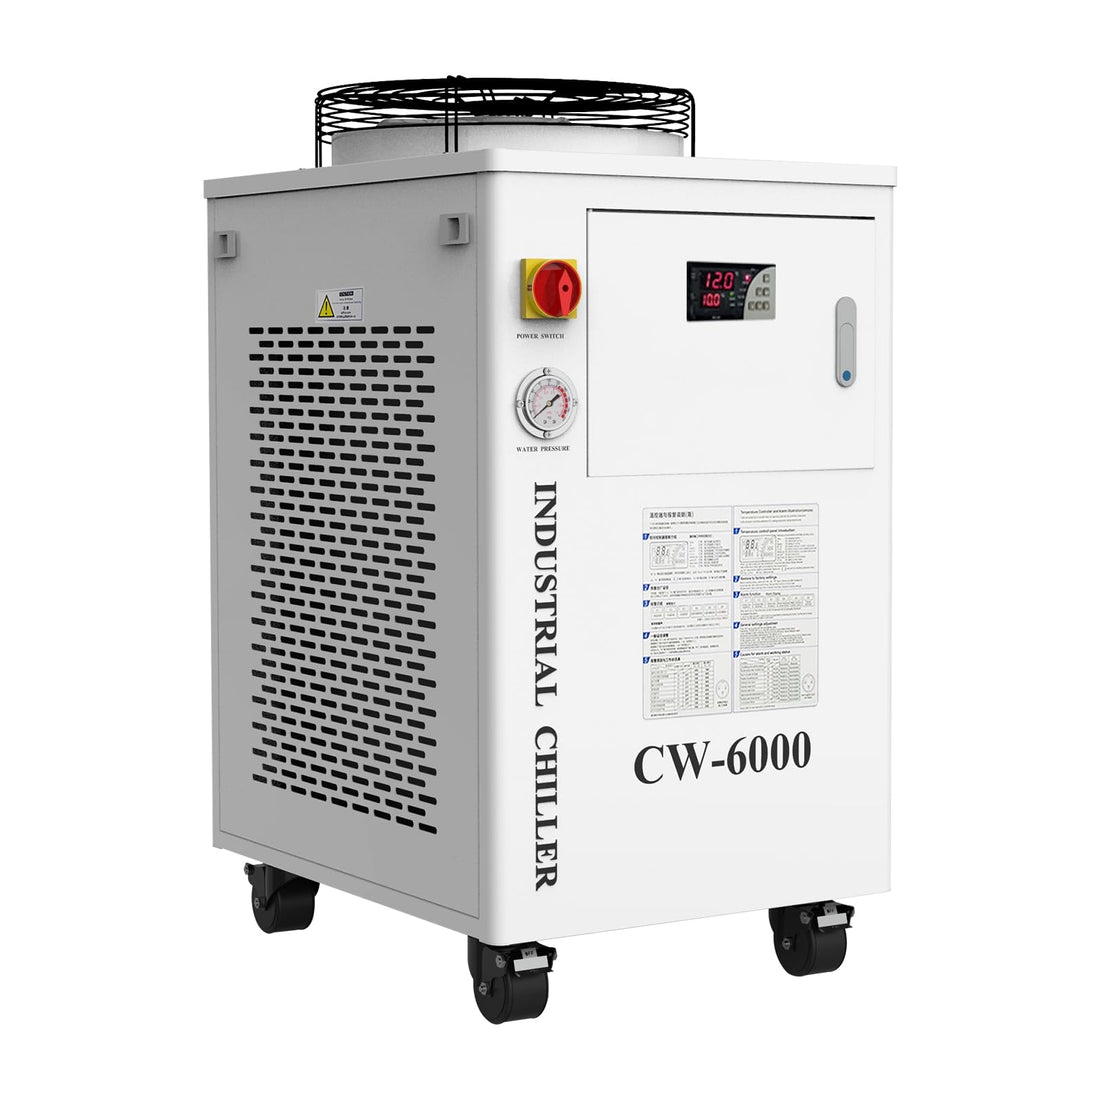 CW-6000 Chiller, 15L, 8.7gpm, 9125 BTU for CO2 Lasers